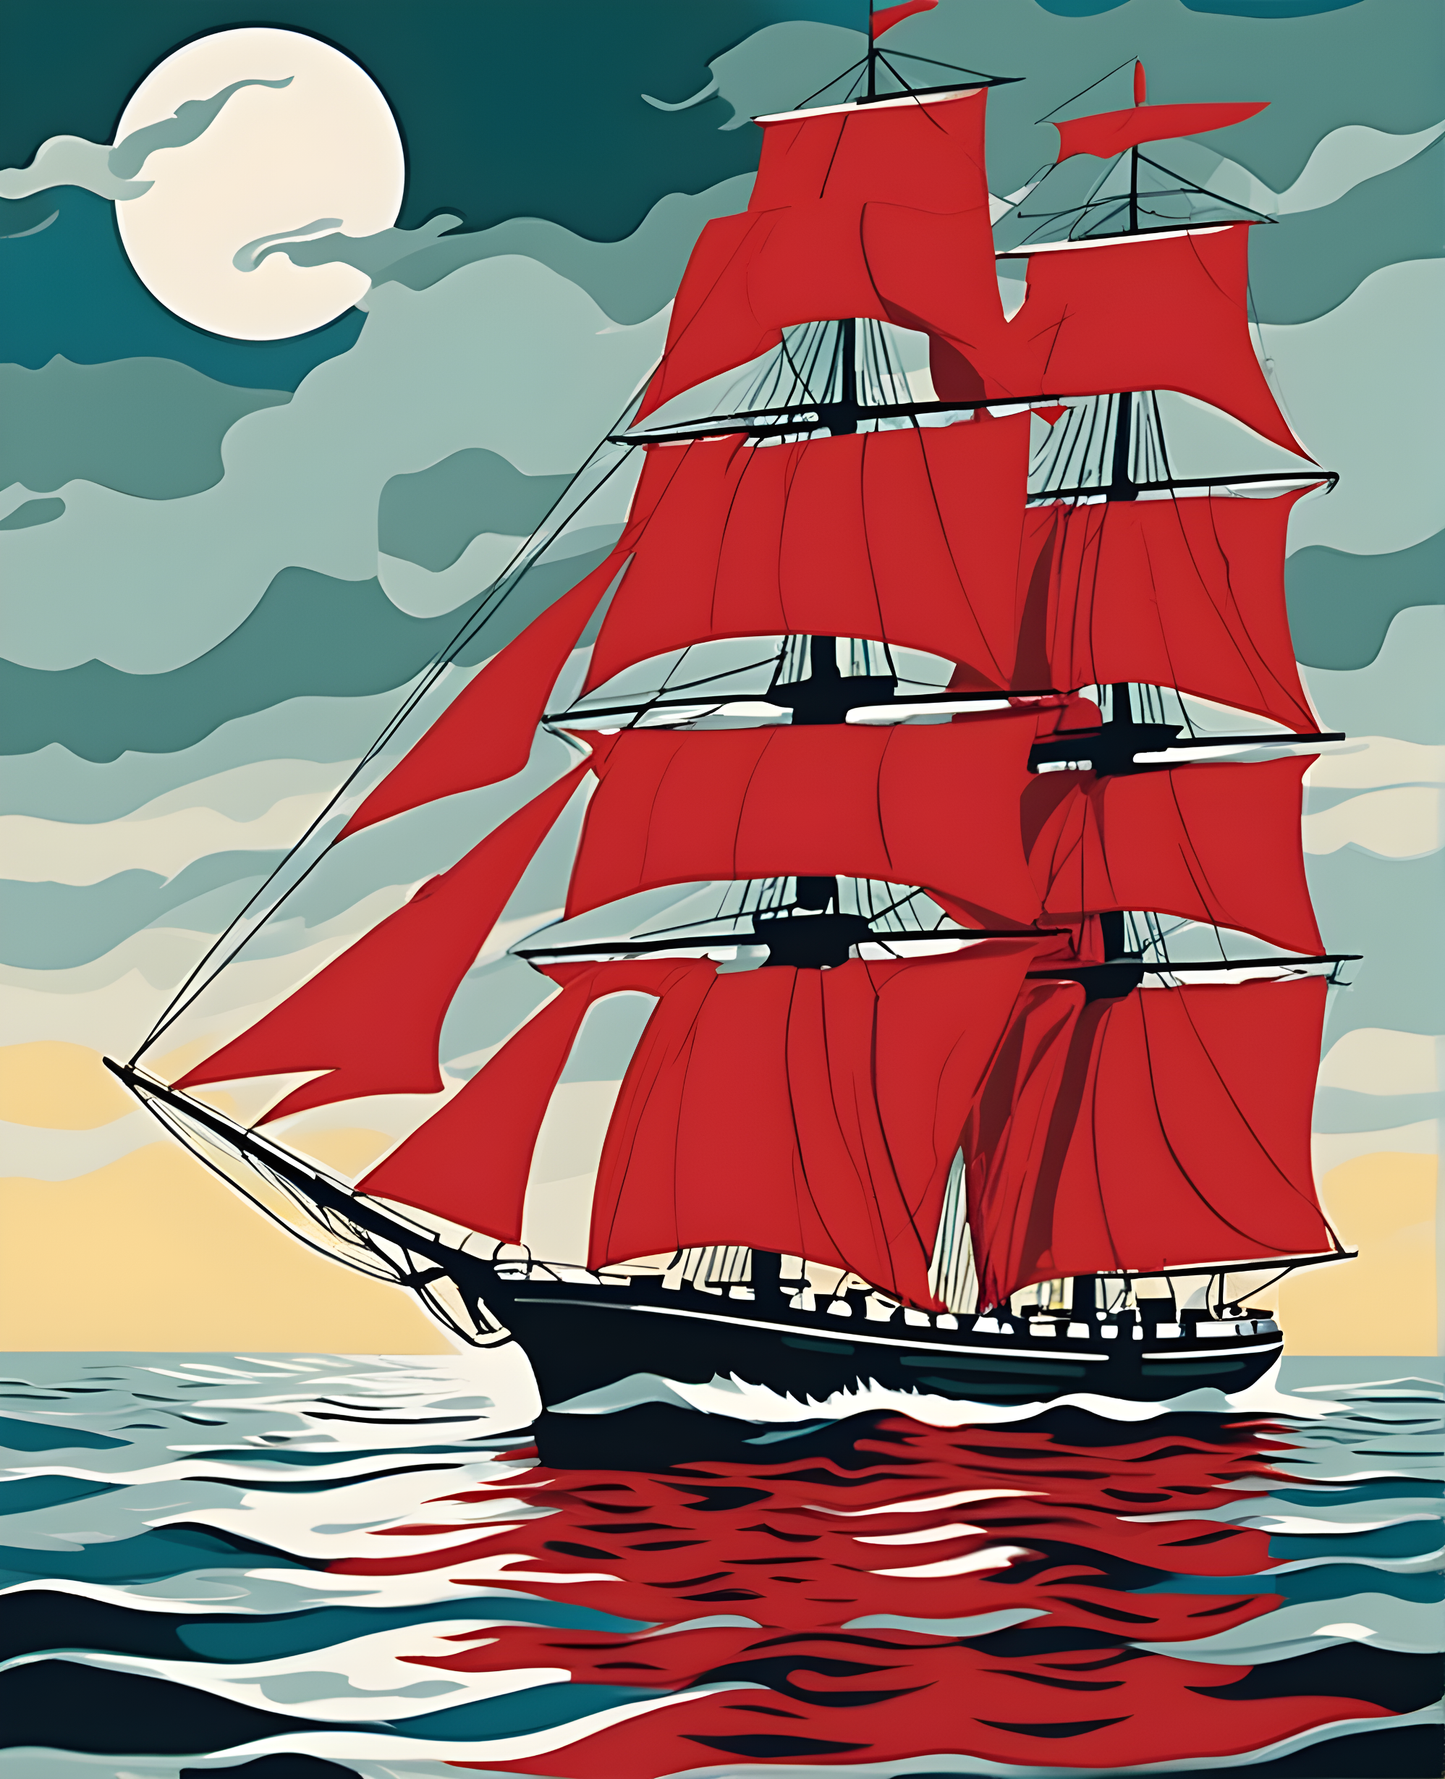 Red Sails at Sea (1) - Van-Go Paint-By-Number Kit